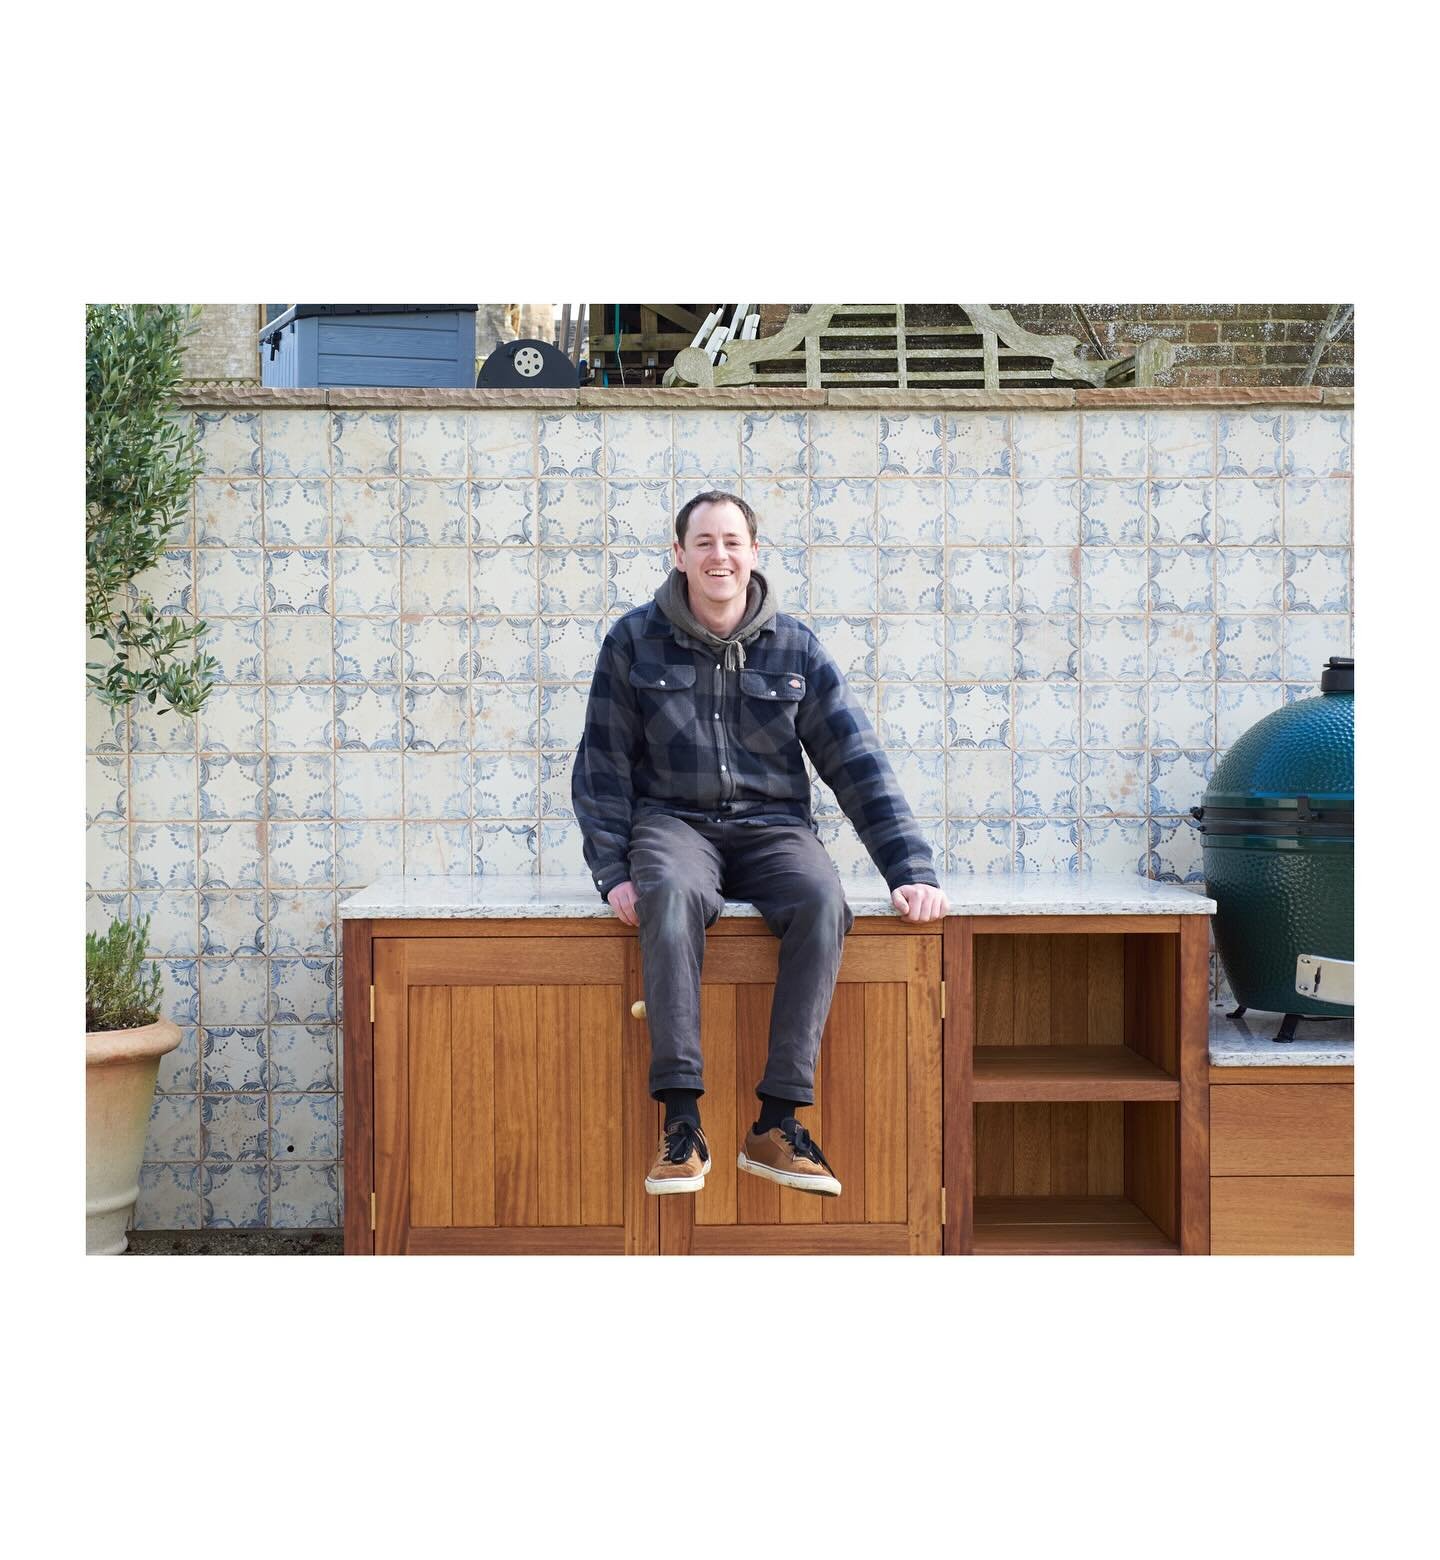 M E E T  T H E  M A K E R 

Hi, I thought it was about time to reintroduce myself. I&rsquo;m Charlie, a bespoke furniture maker currently located in Dorset but soon to be relocating to Ashburton in Devon. My passion for woodwork started at a young ag